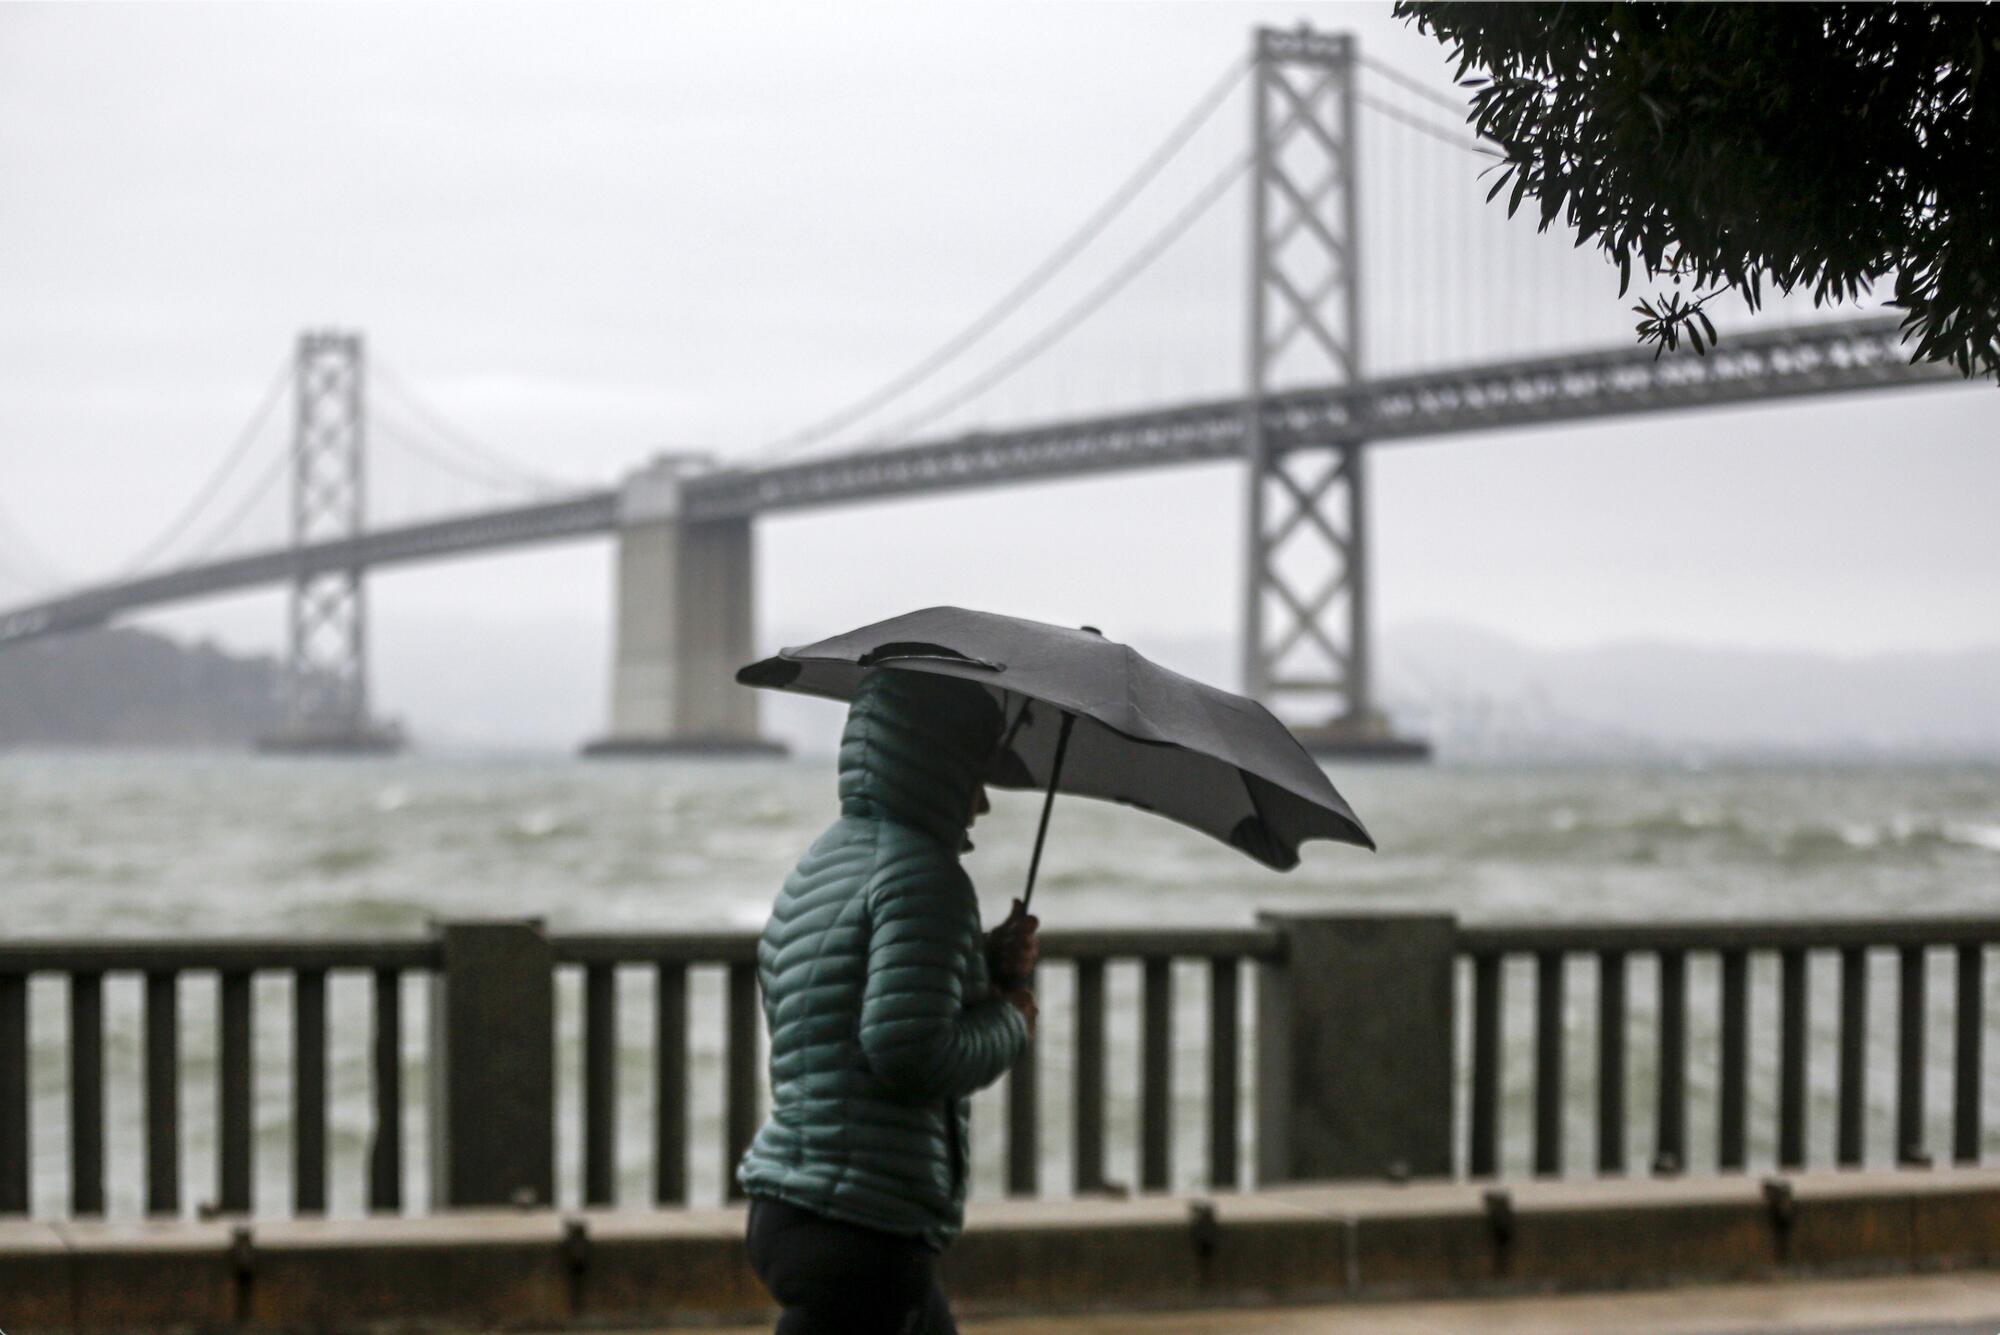 A person in a coat with an umbrella walks next to a rail overlooking a bridge over water